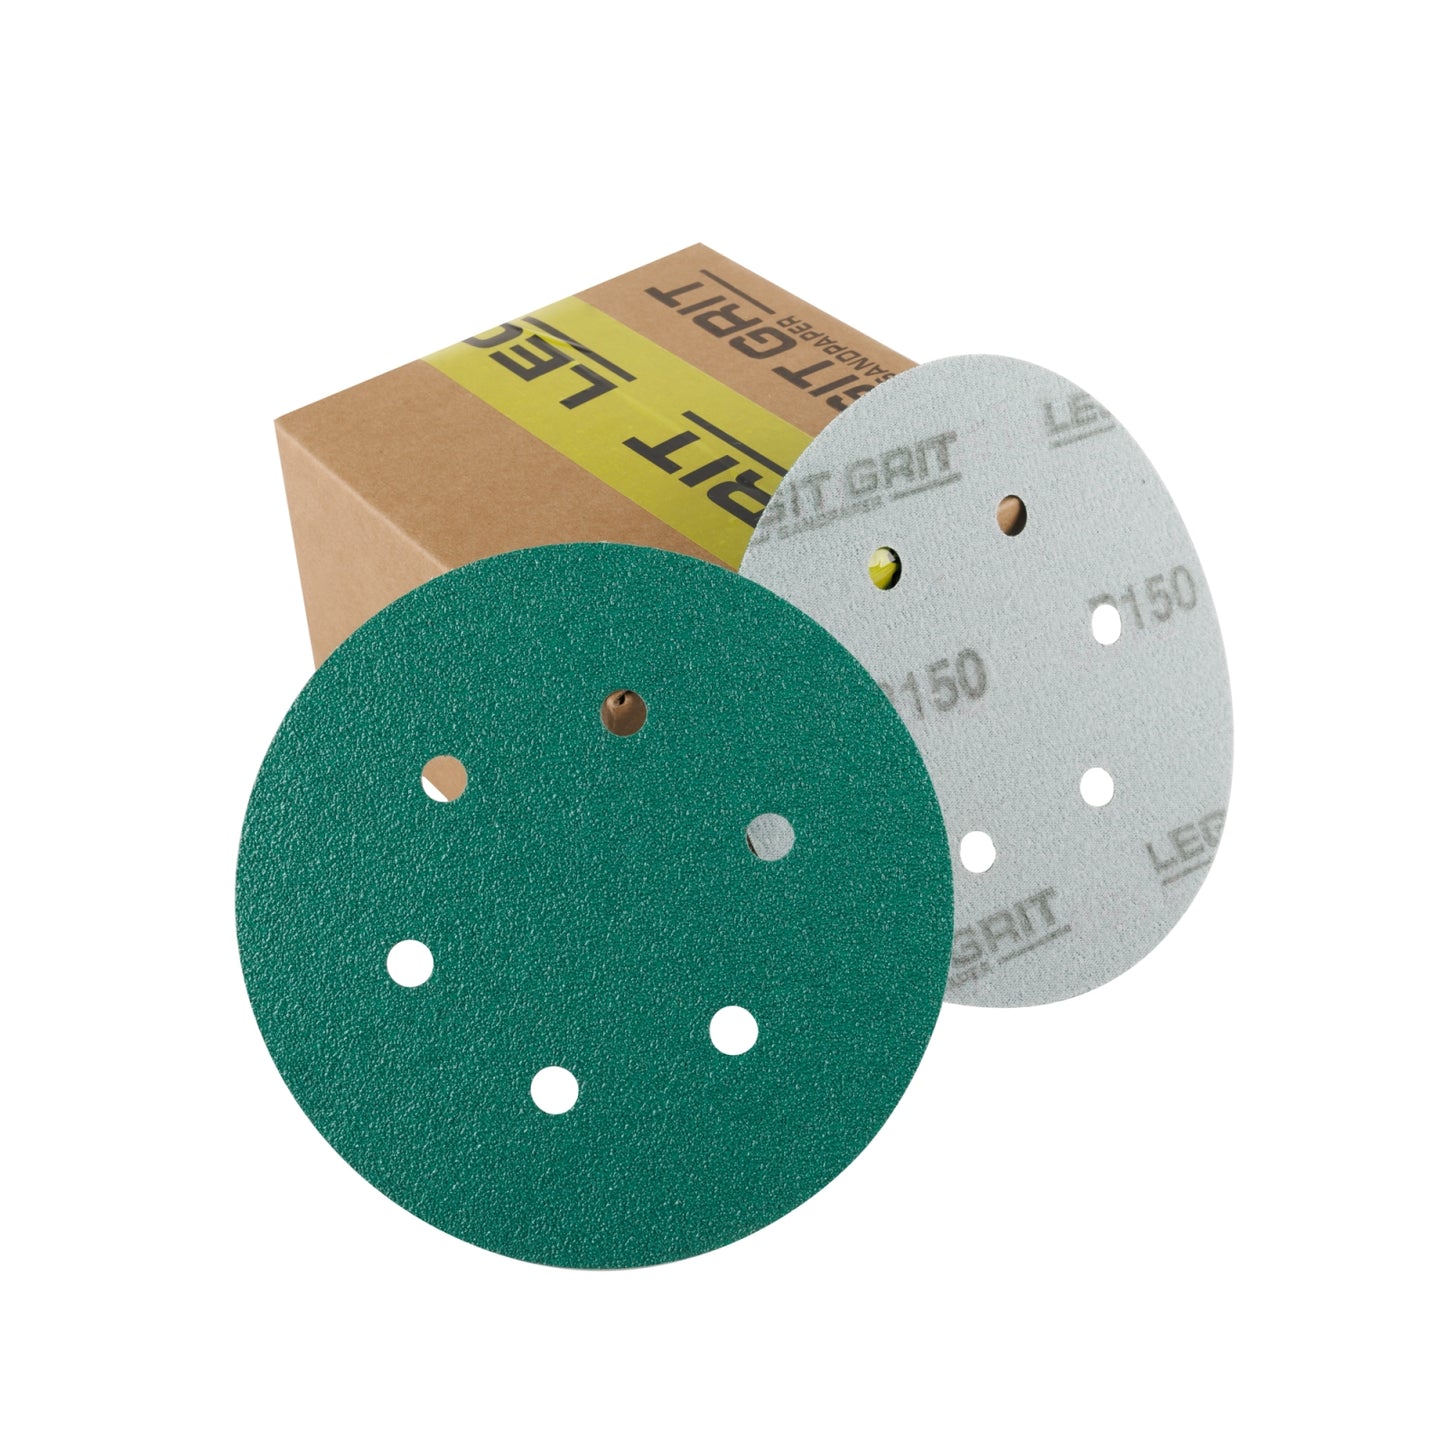 Legit Grit 6 inch Sand paper Disc, 6-Hole, Mixed Grit Sample Pack, GRITS: 80/120/150/180/220 (2 of each) 10 Pack